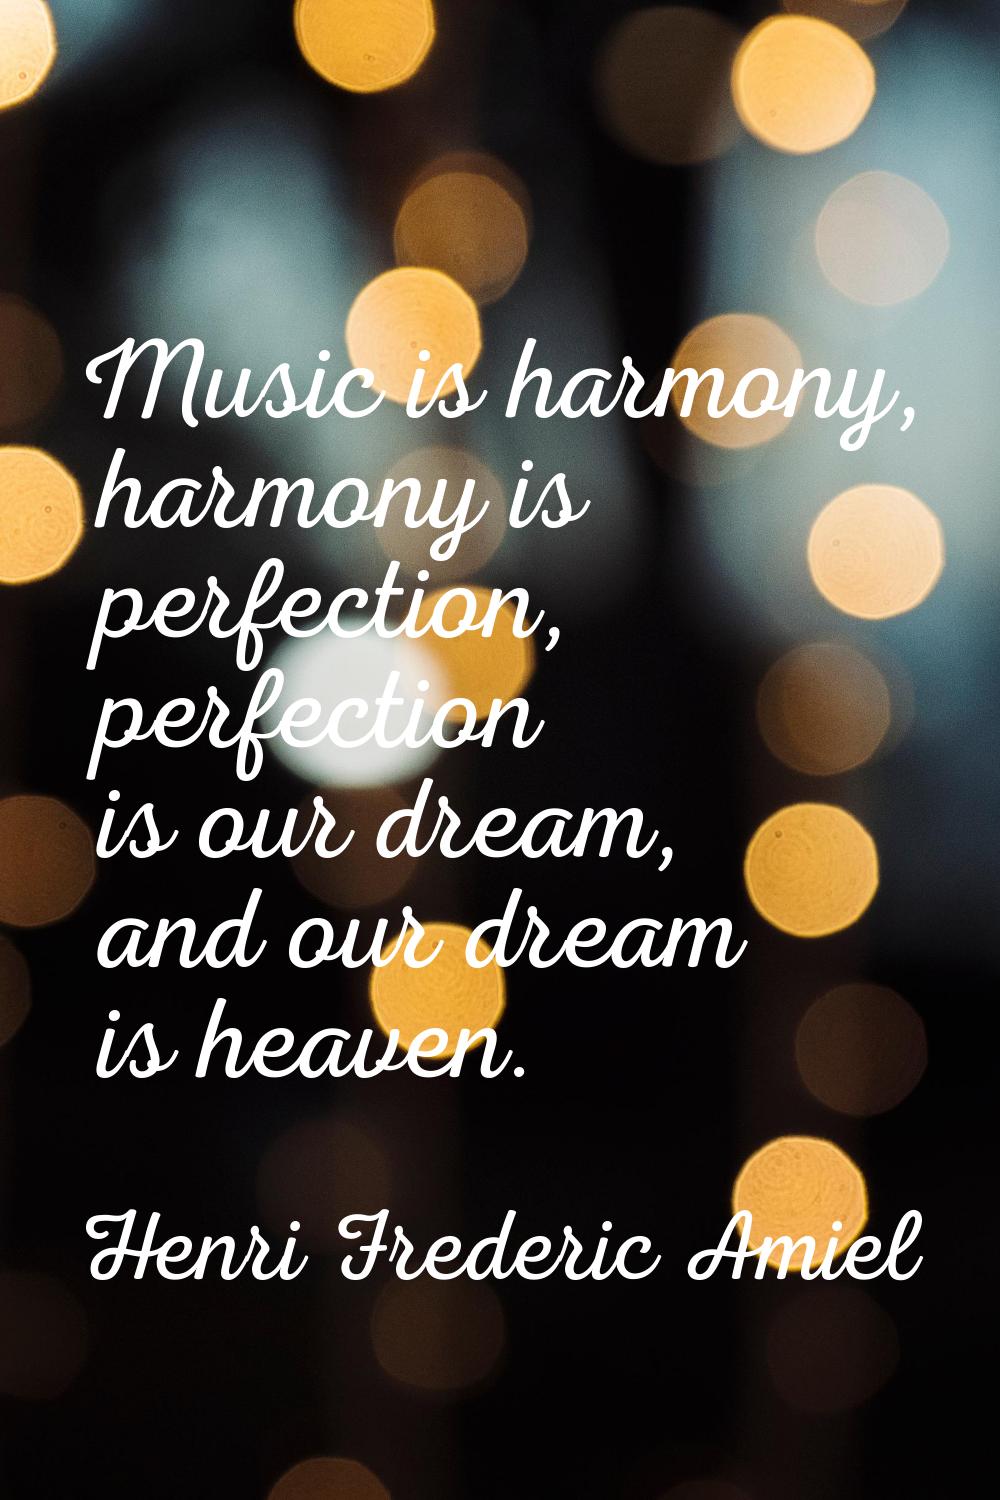 Music is harmony, harmony is perfection, perfection is our dream, and our dream is heaven.